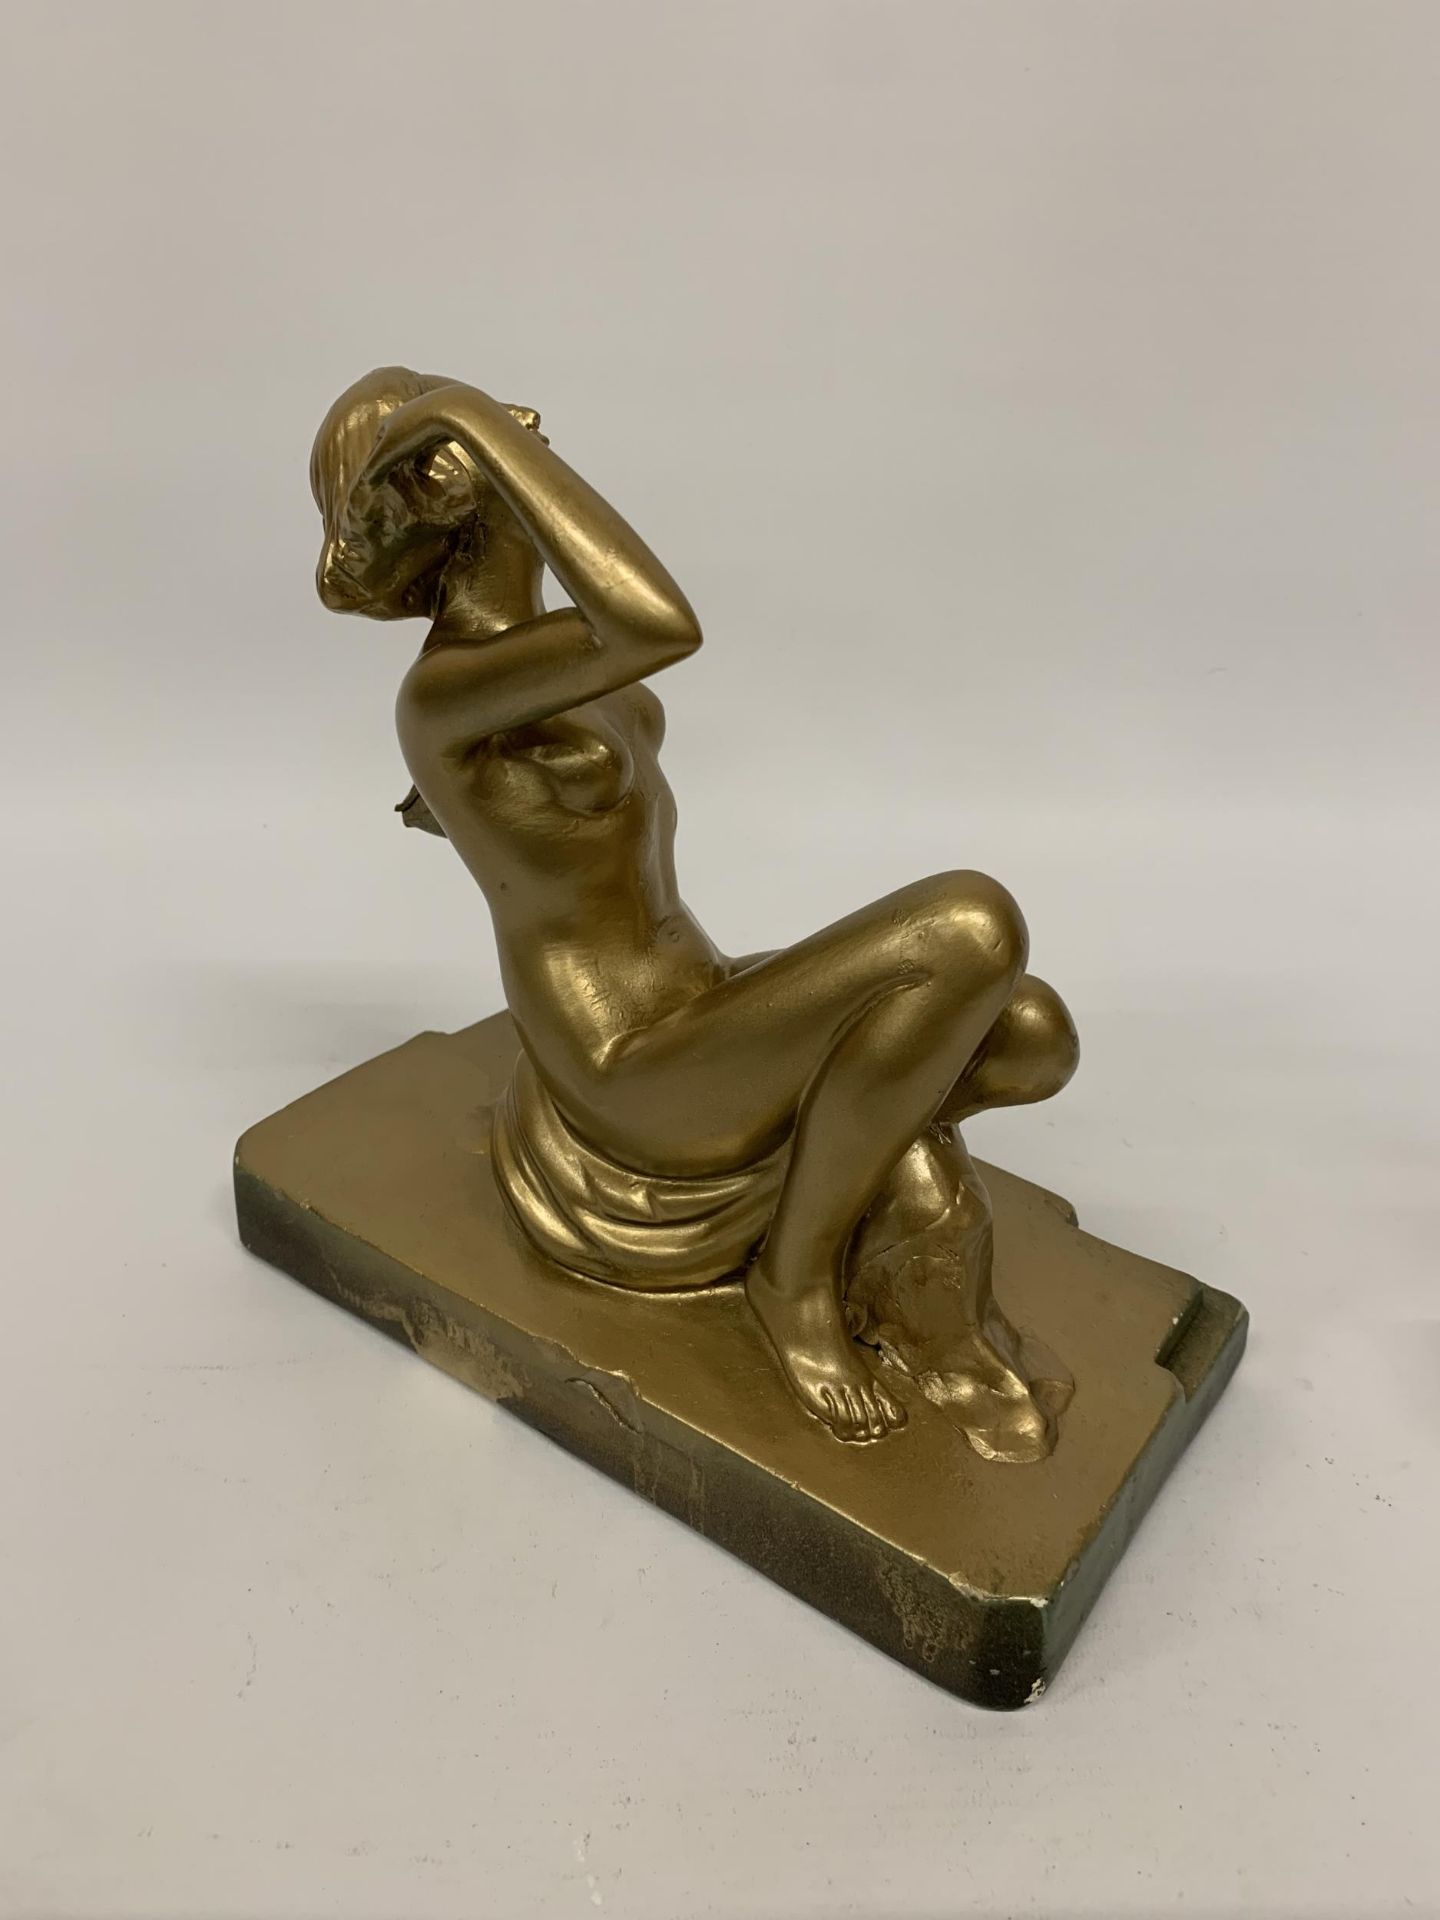 A METAL ART DECO STYLE GOLD COLOURED FIGURE 'RING LADY' HEIGHT 23CM, LENGTH 24CM - Image 3 of 6